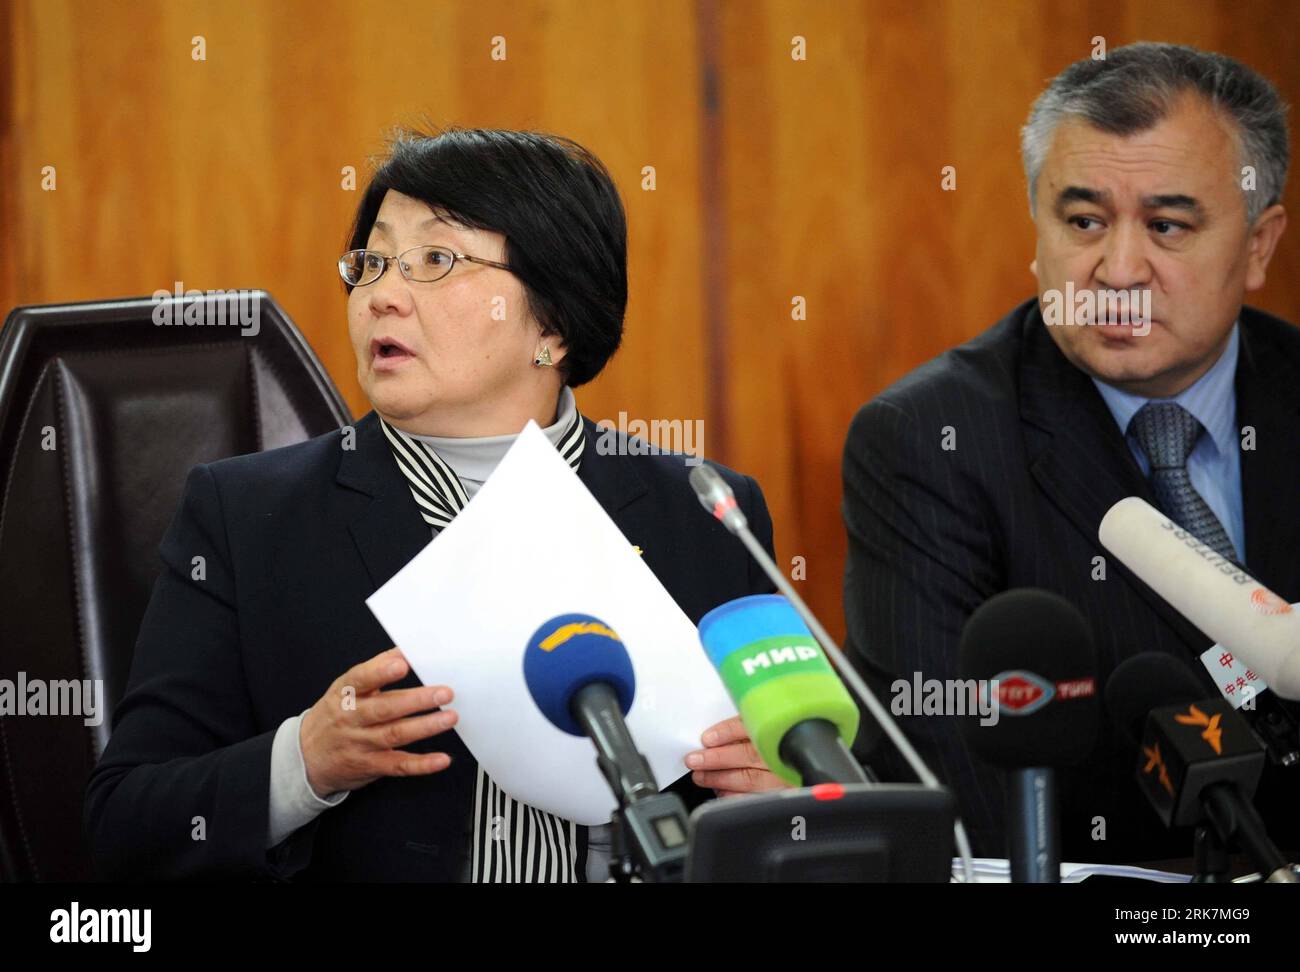 Bildnummer: 53928009  Datum: 08.04.2010  Copyright: imago/Xinhua  Interim government leader Roza Otunbayeva (L) and Omurbek Tekebayev, chairman of the opposition Ata-jurt movement (fatherland), attend a press conference in Bishkek, capital of Kyrgyzstan, April 8, 2010. Kyrgyz opposition parties on Thursday formed an interim coalition government, while President  refused to step down after clashes that left at least 75 dead and another 1,000 injured. (Xinhua/Sadat) (lmz) (19)KYRGYZSTAN-BISHKEK-UNREST-PRESS CONFERENCE PUBLICATIONxNOTxINxCHN Politik Putsch Kirgistan People Übergangsregierung kbdi Stock Photo